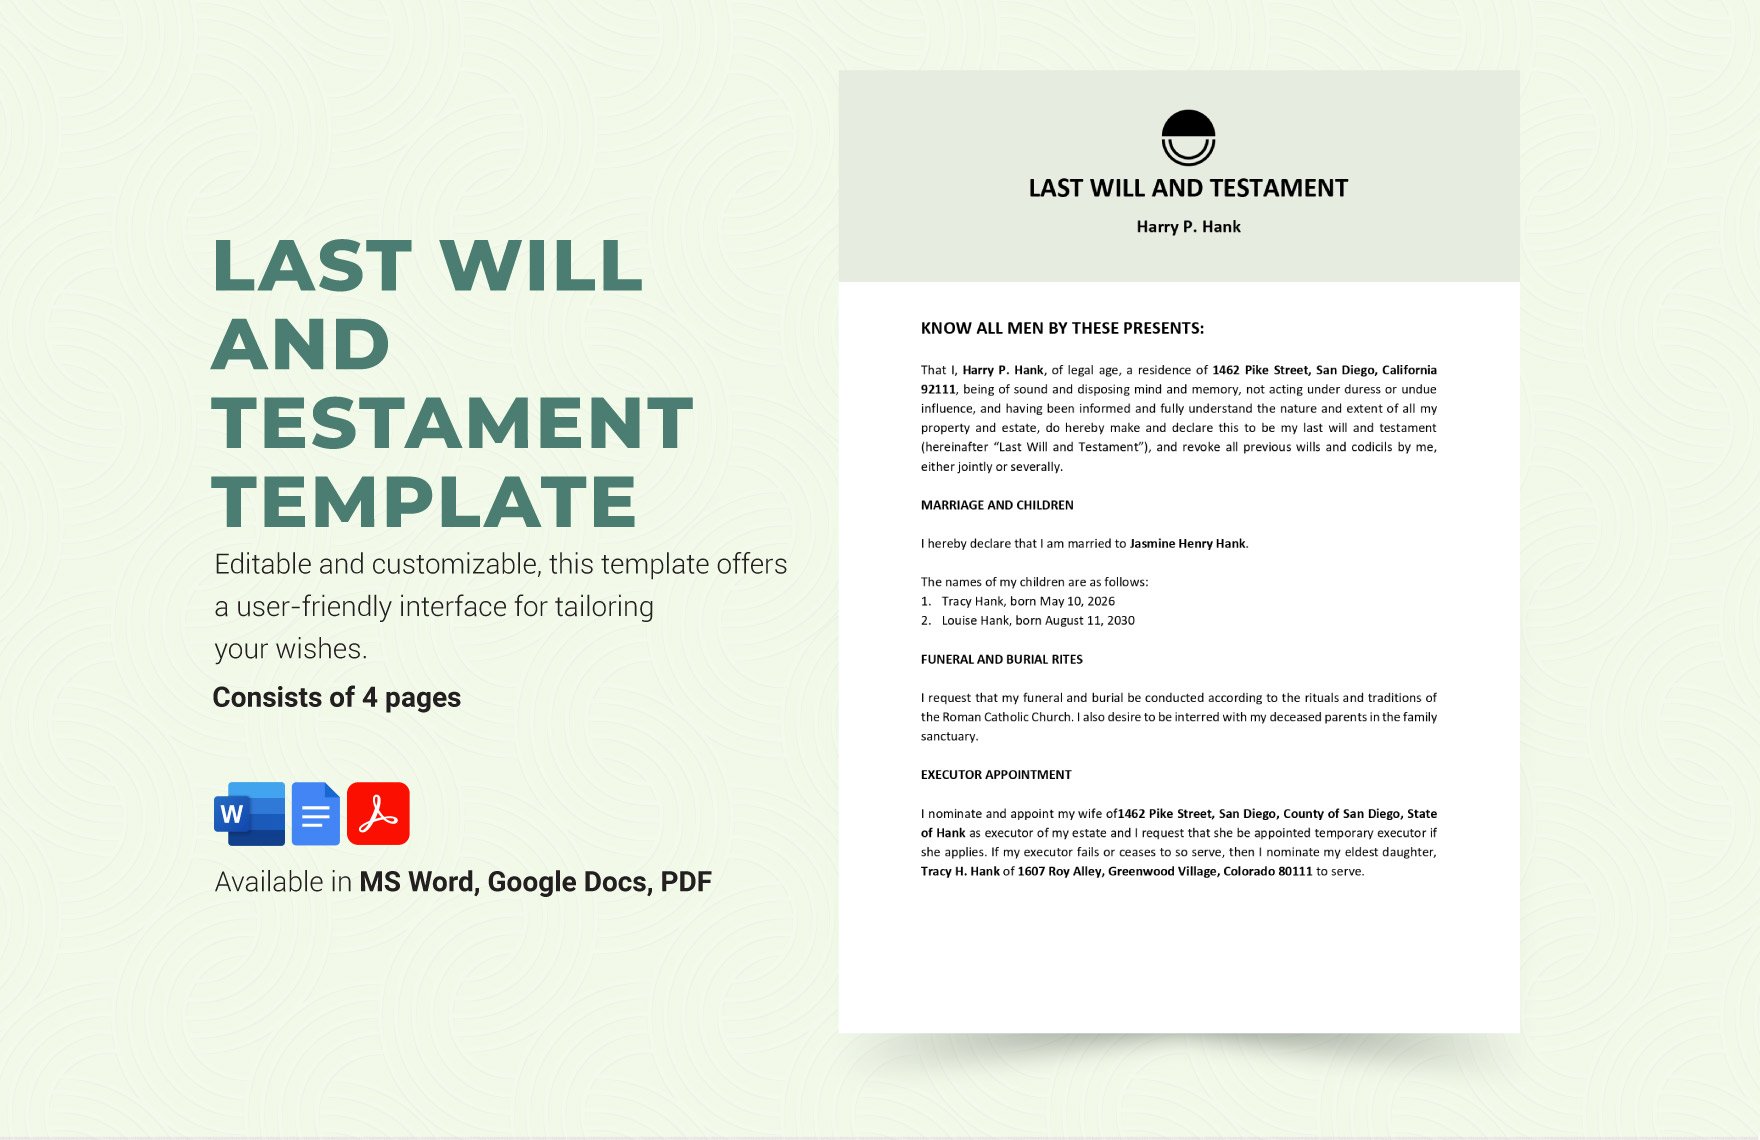 Free Last Will and Testament Template in Word, Google Docs, PDF